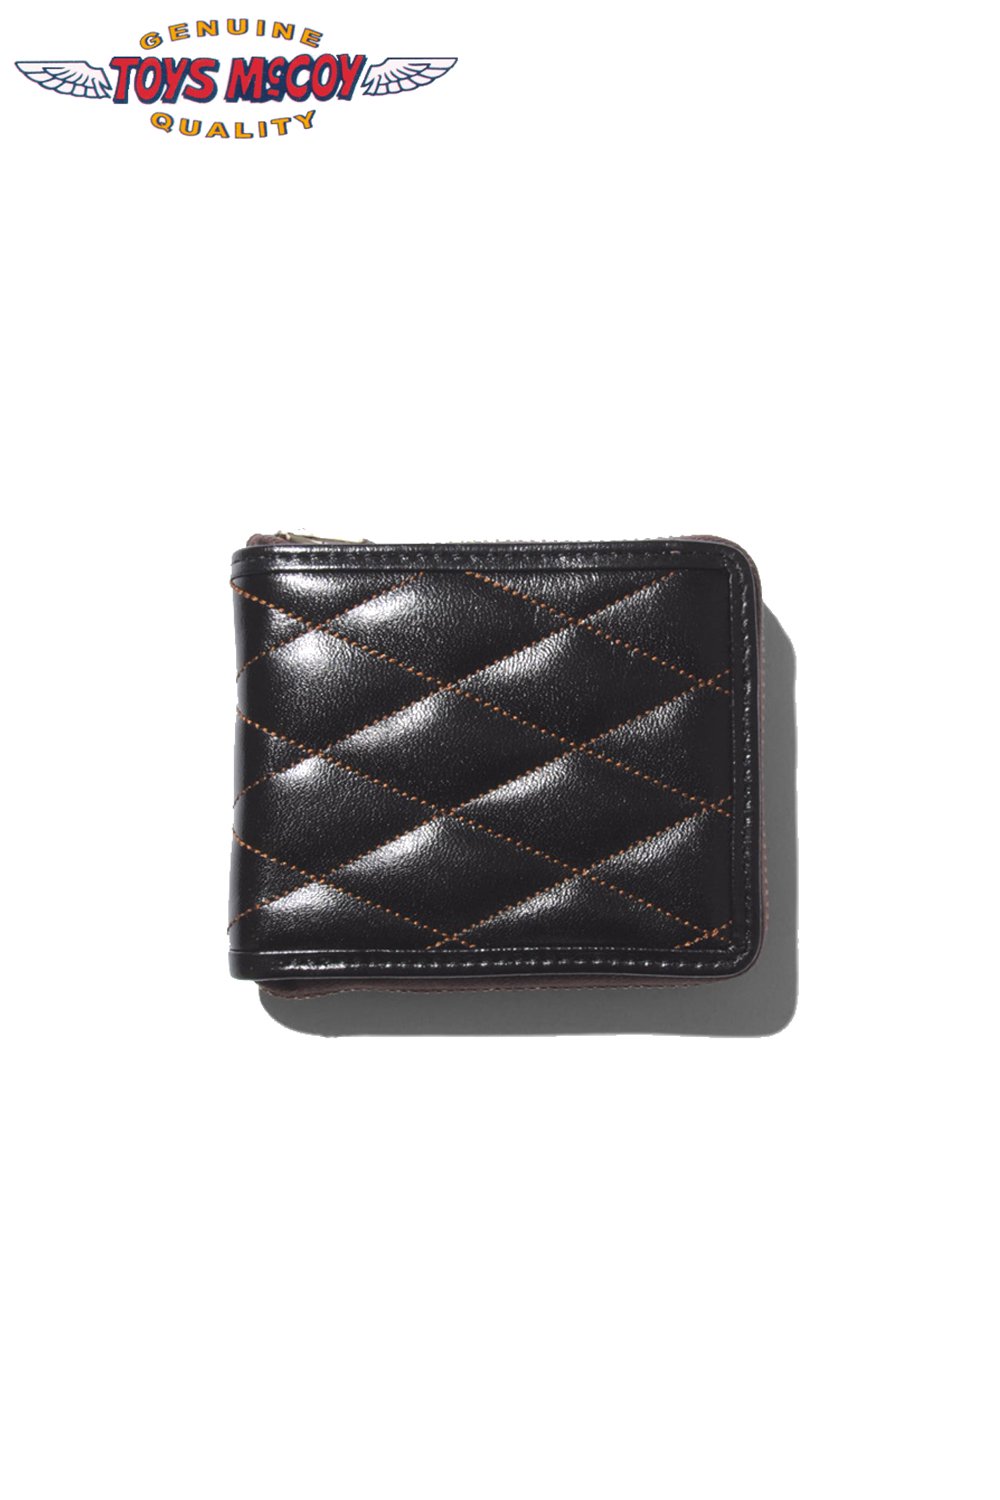 TOYS McCOY(トイズマッコイ) レザーウォレット LEATHER QUILTED WALLET 